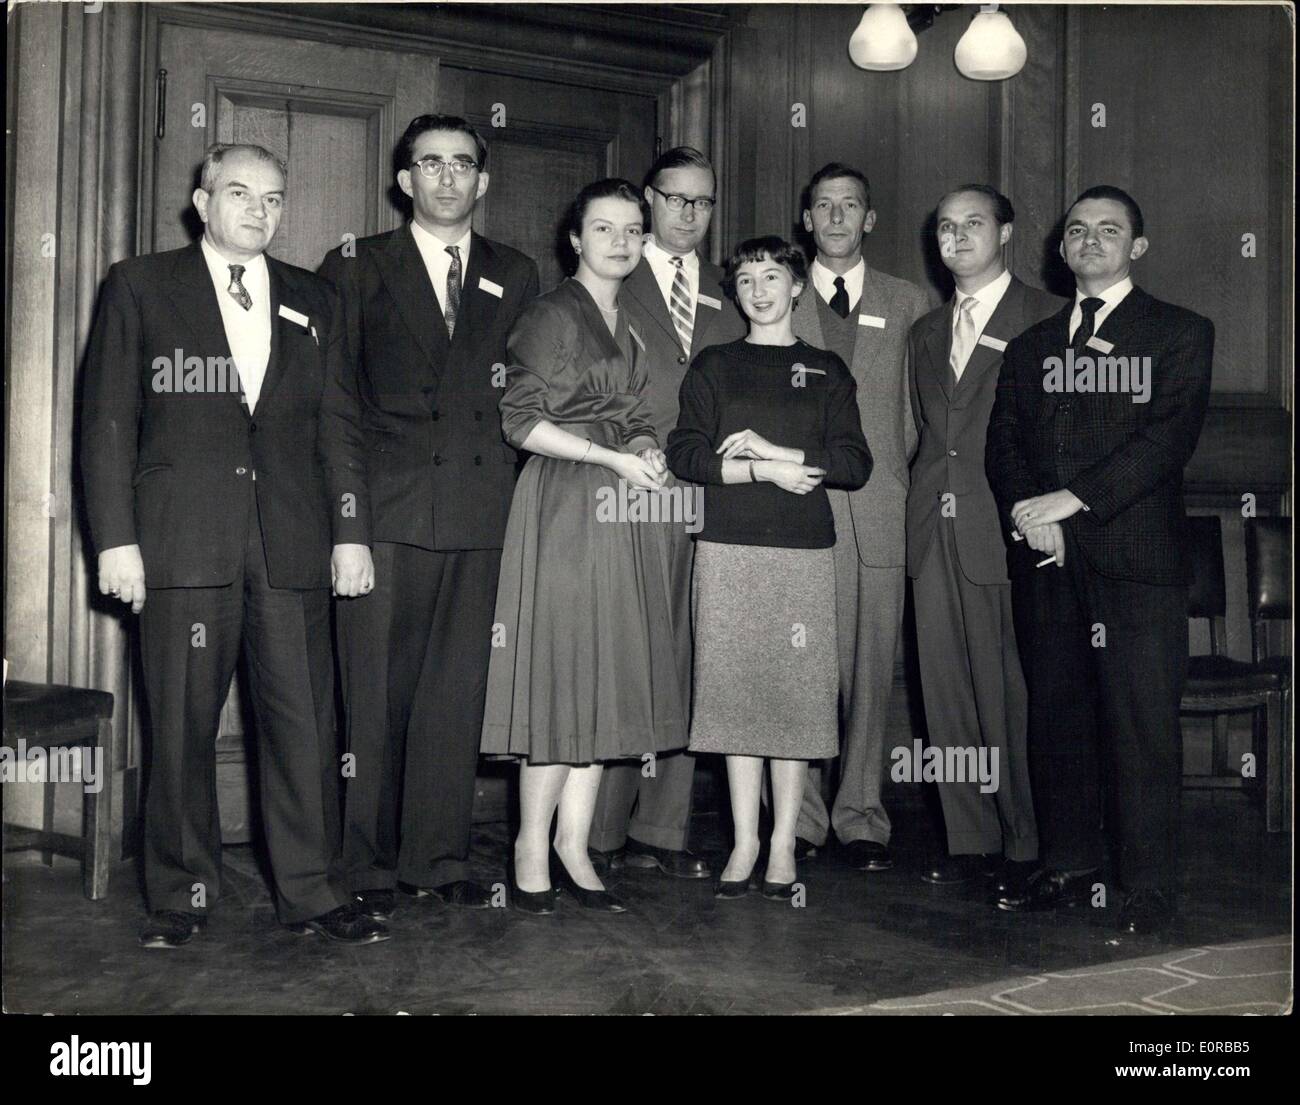 Nov. 21, 1958 - Foreign and Commonwealth teachers Visit County Hall..More than 100 Teachers from the Commonwealth Europe and the United States - who are now teaching in London Schools - this afternoon attended a reception at County Hall, Westminster, given by the Chiarman of teh Education Committee, Mr. Harold C. Sherman...Some of them are here under the ''Interchange''scheme -Keystone Photo SHows:- Some of the Teachers at the Reception this eveing L-R: Mr. F.P. Kulak (USA): MR. G.,A. Simpon (NZ); MME. C. Jacquinot (France); Heir Peter Adami (Germany); Frau.m. Schneedergee (Switzarland); Mr Stock Photo